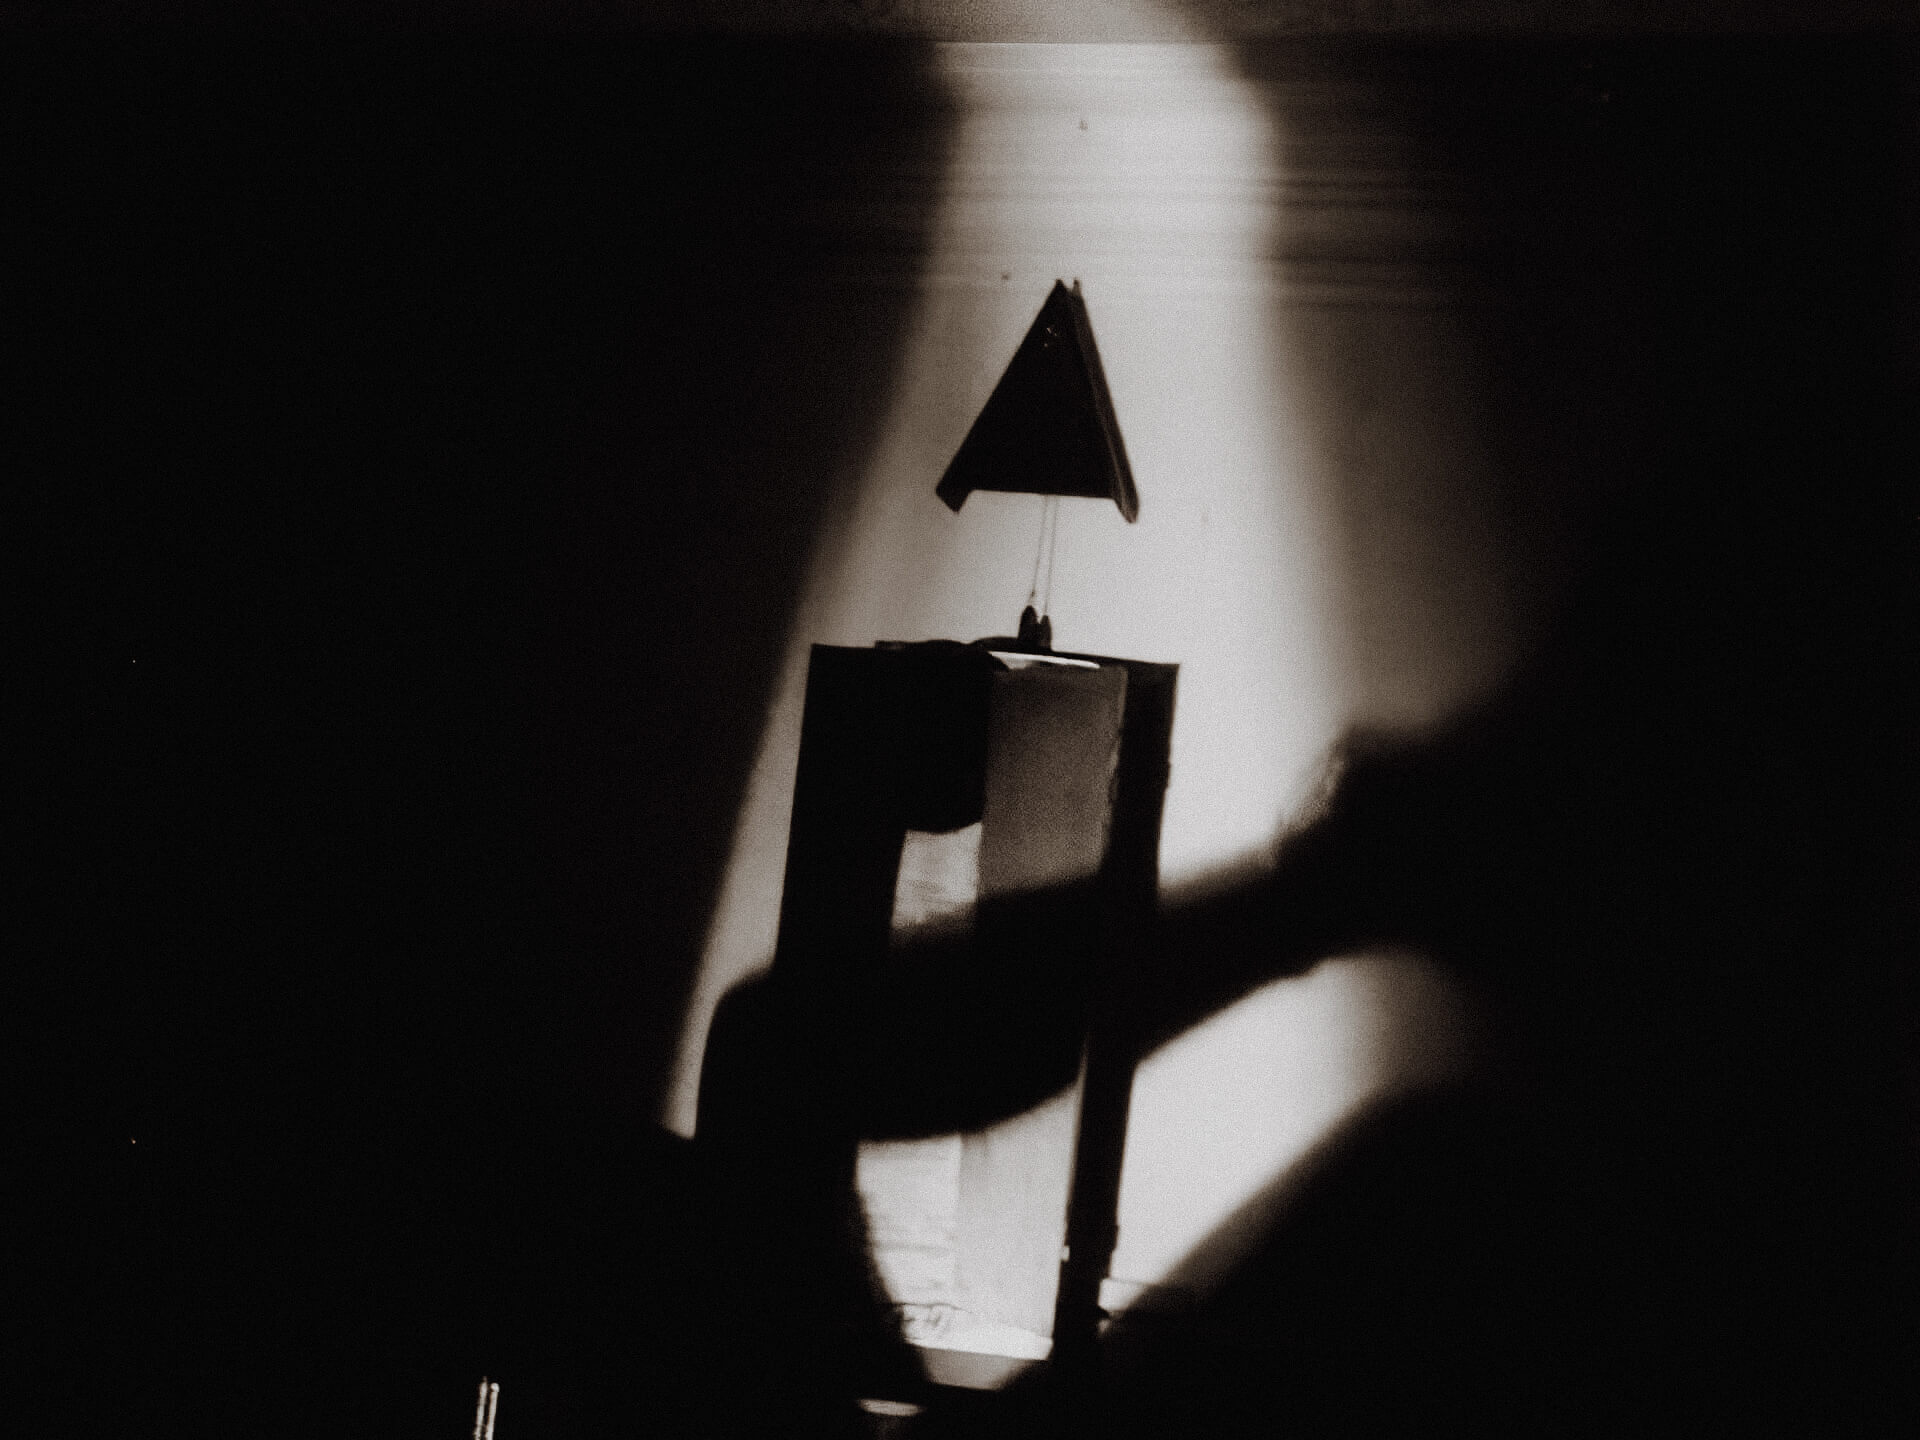 Black and white image of the metal object. A spotlight highlights the object in the darkness.